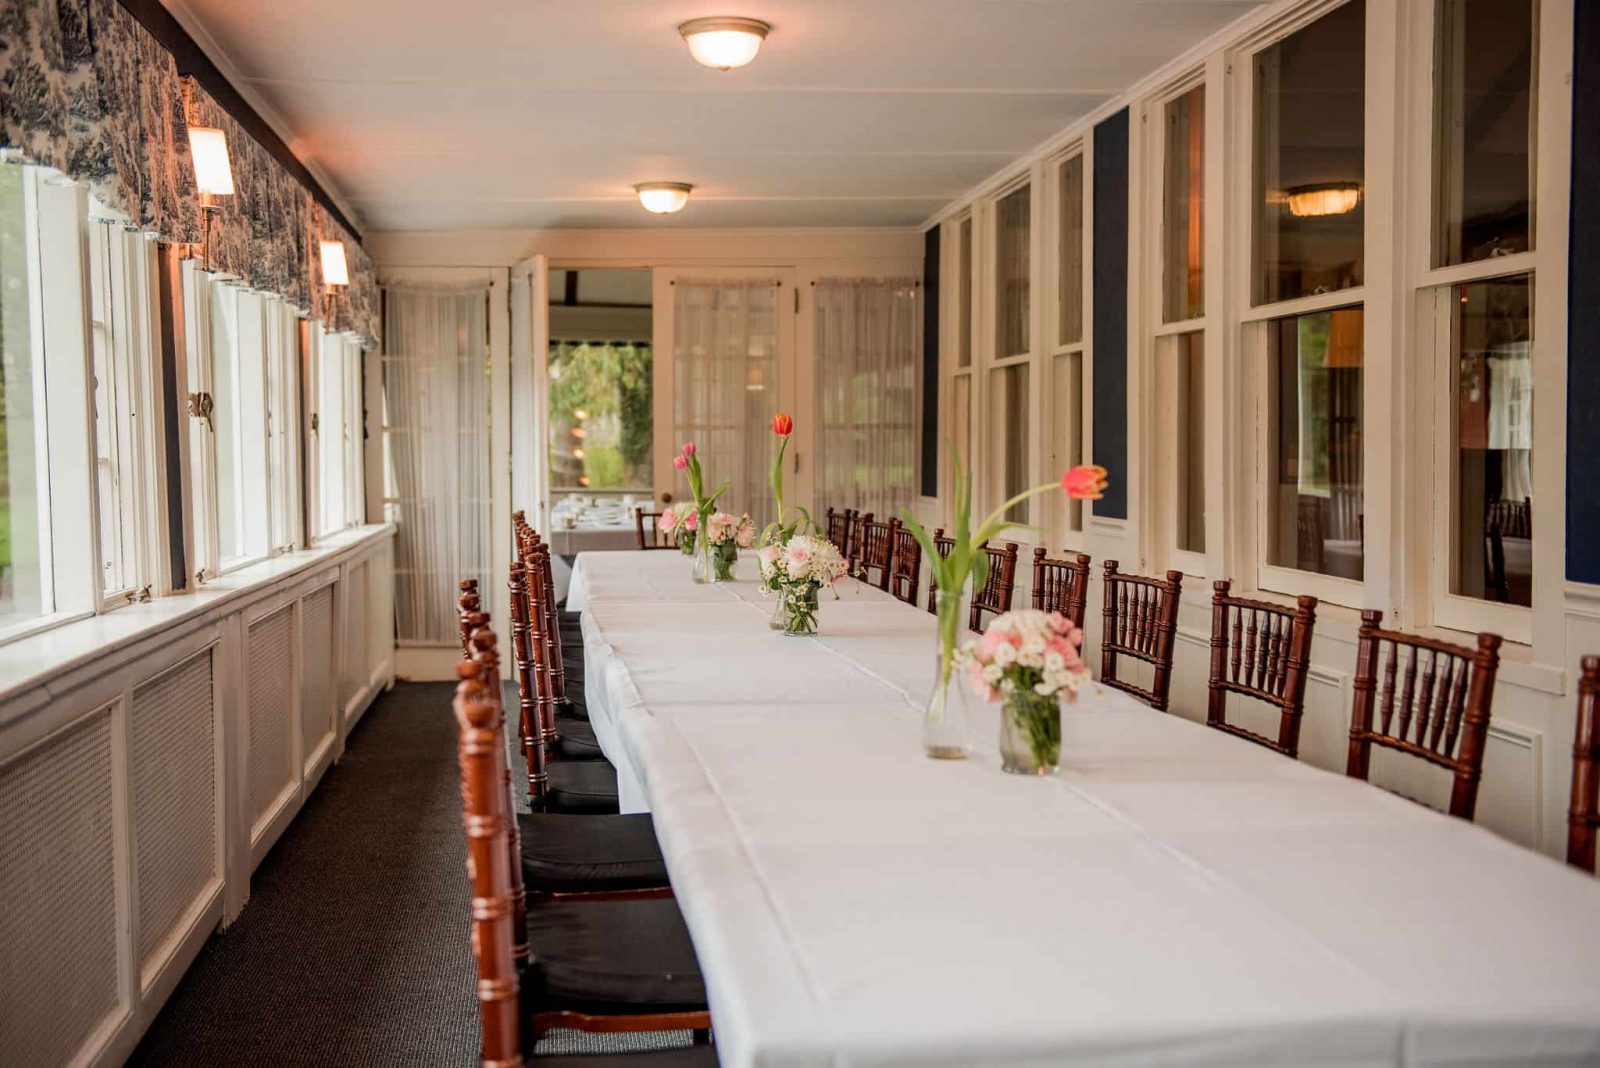 A long dining table stretches out in the porches